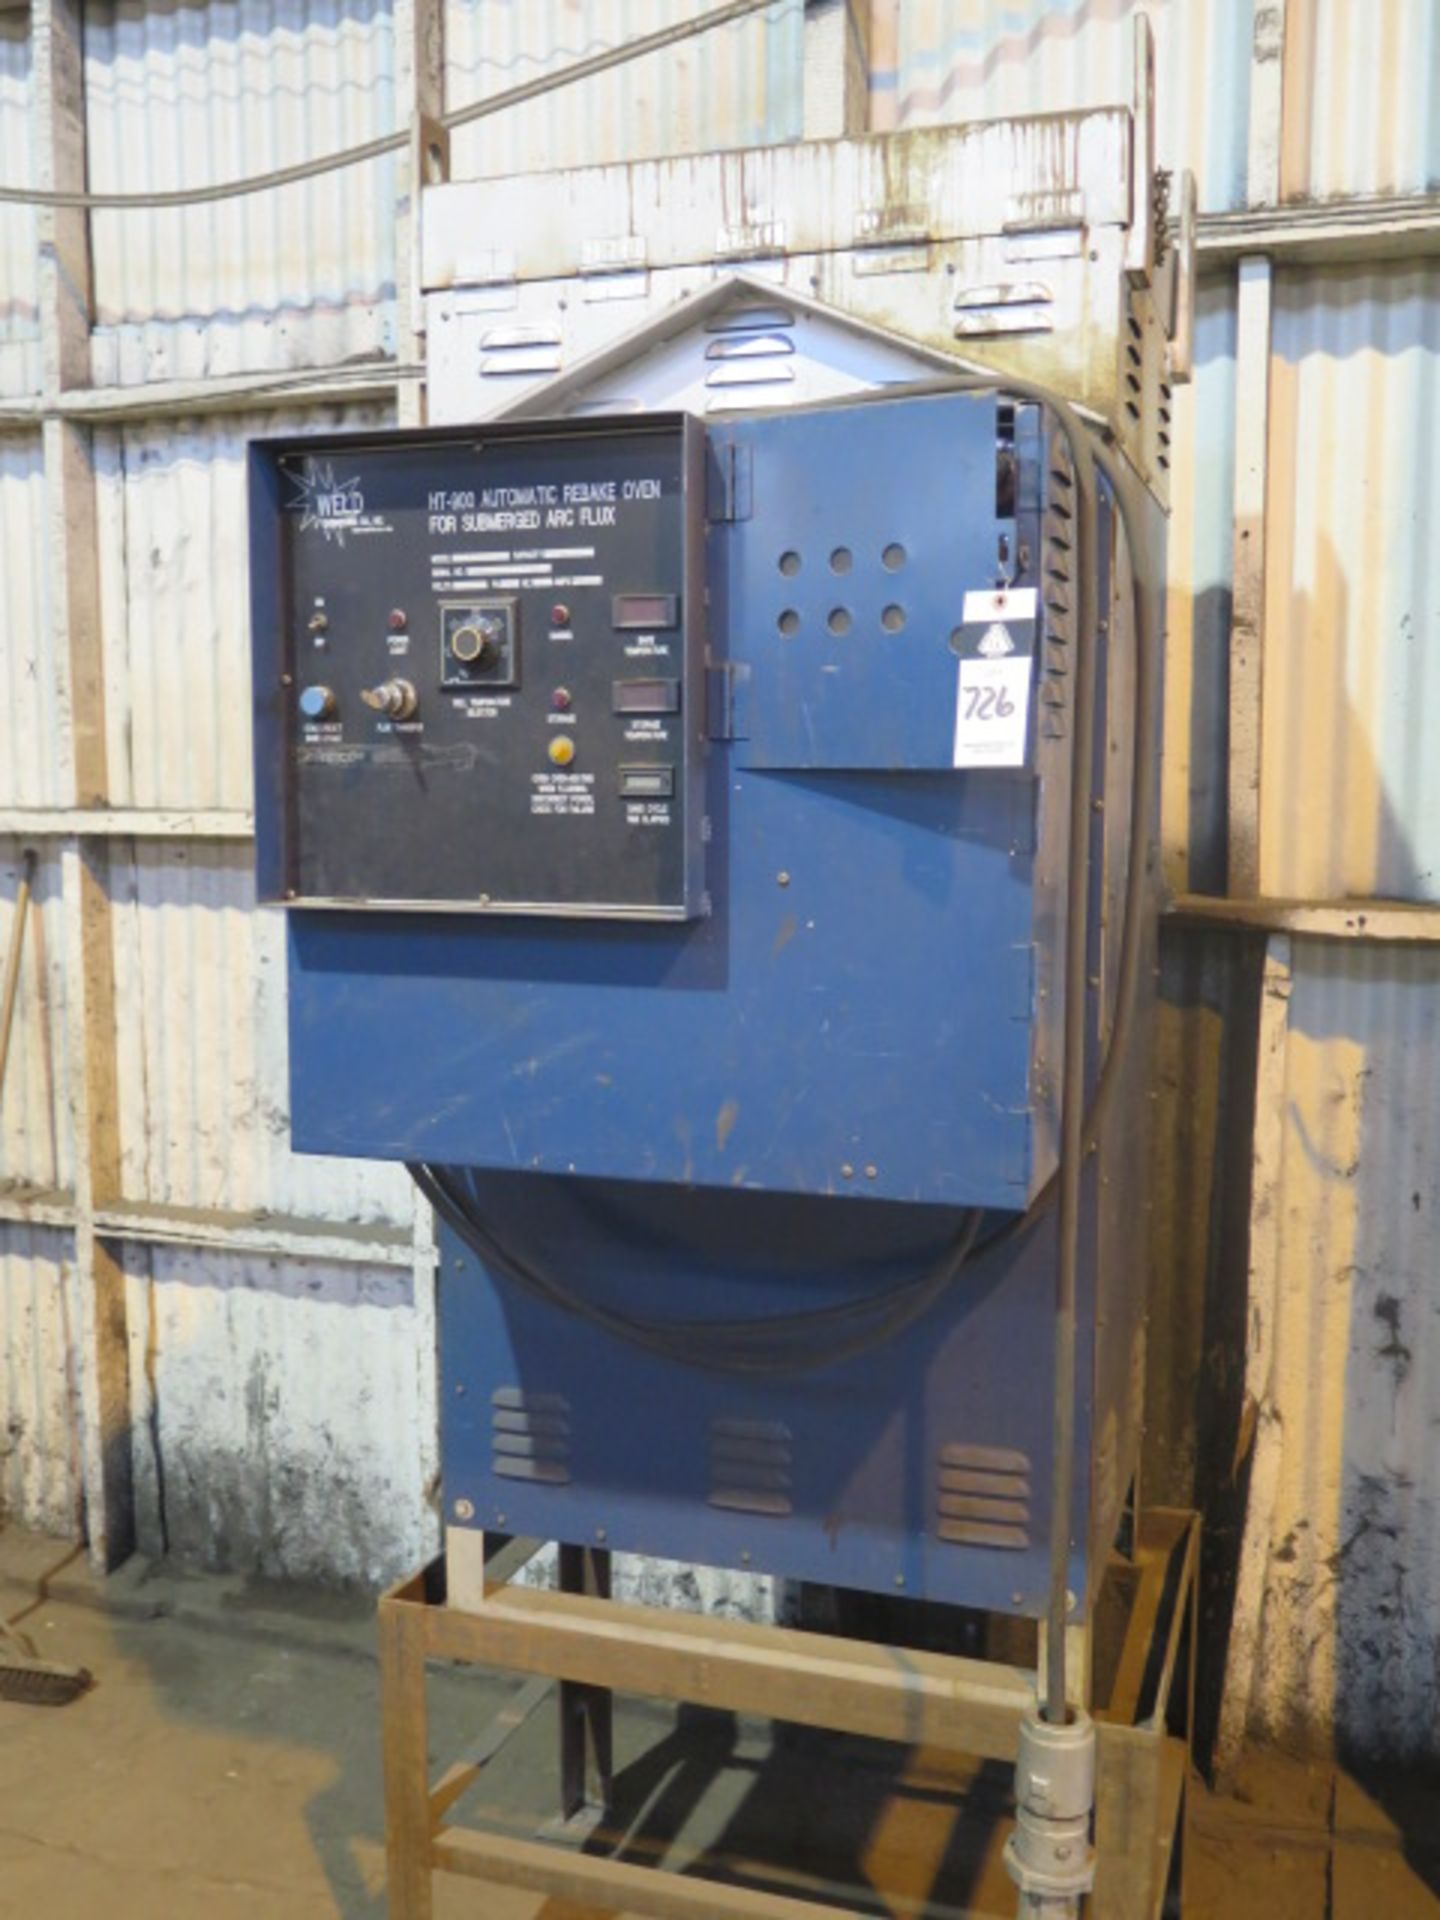 Weld Engineering mdl. HT-900 900 Lb Cap Auto Rebake Oven for Submerged Arc Flux